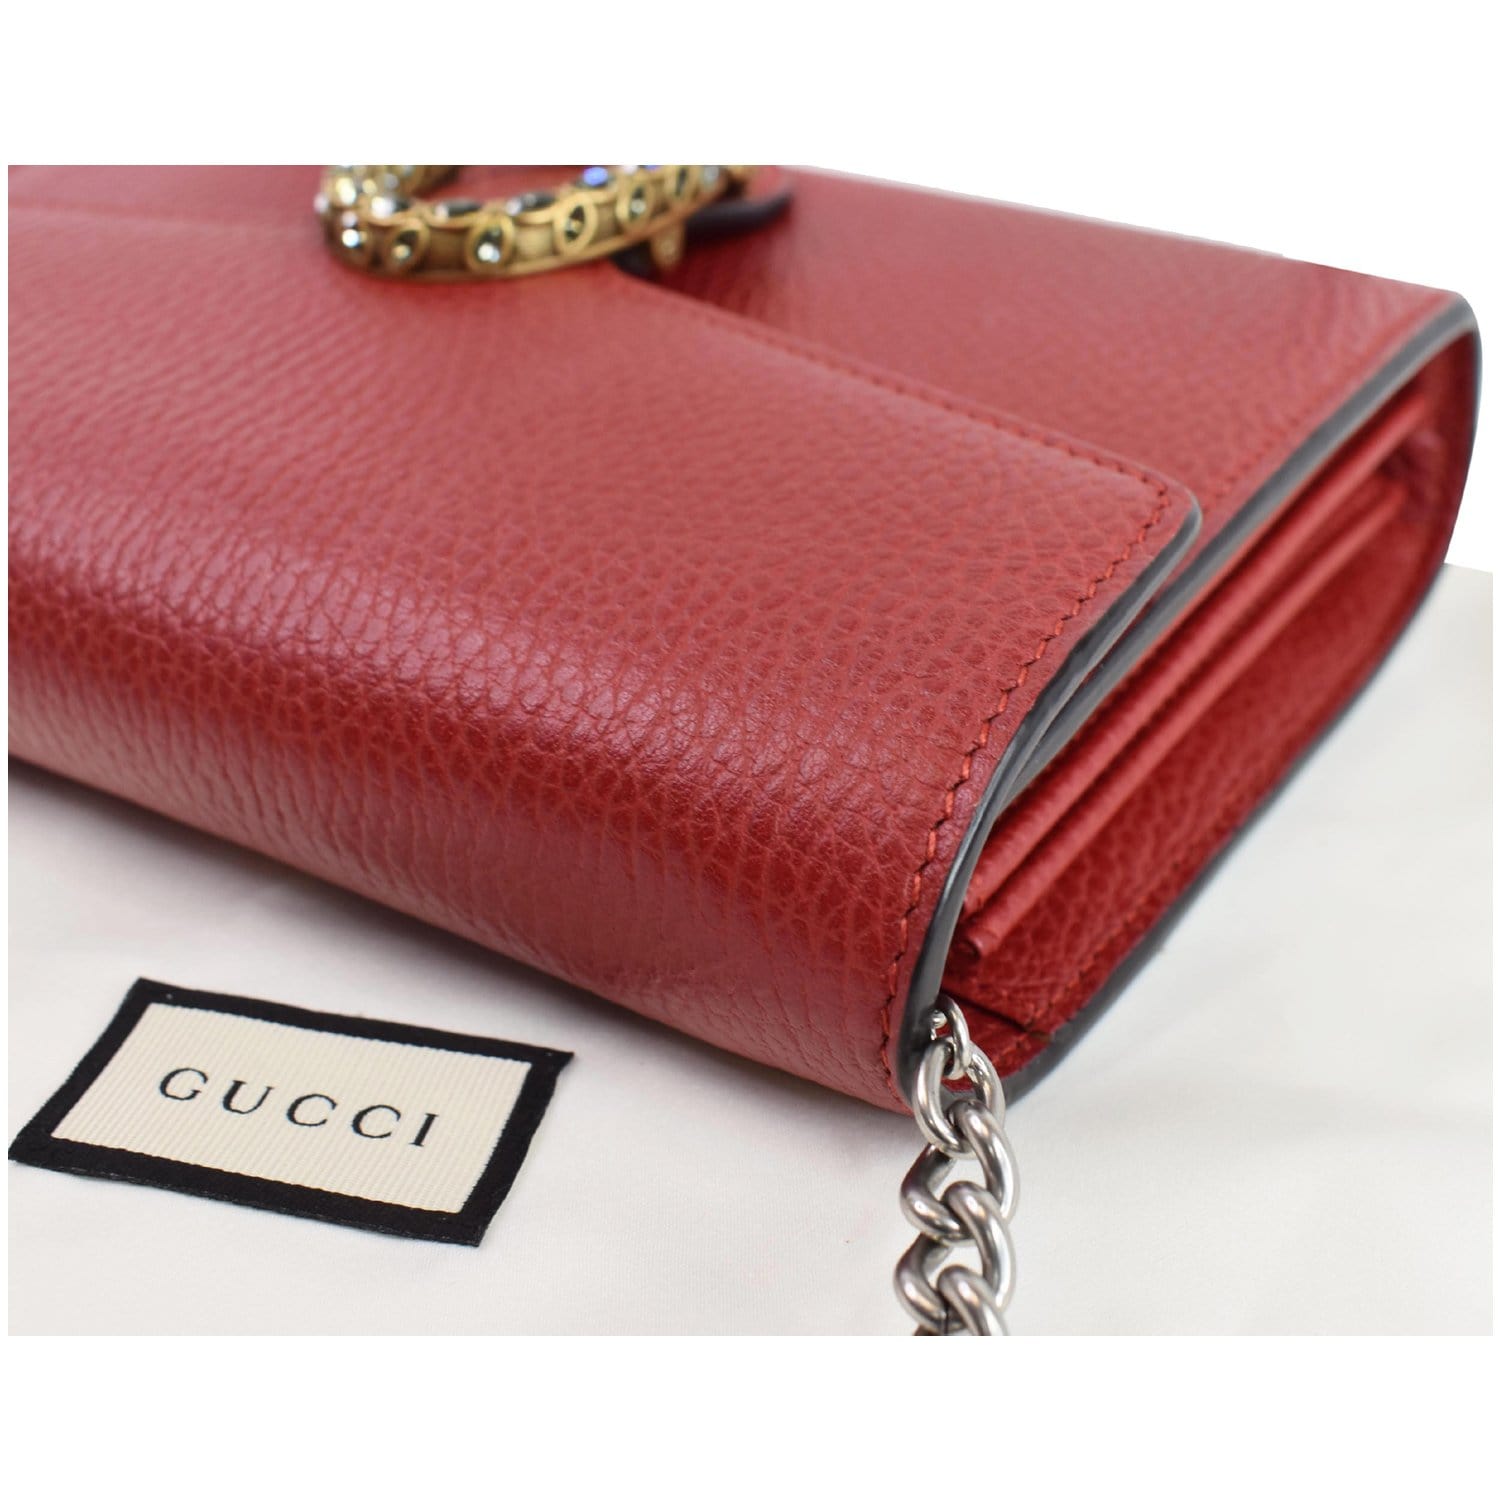 Dionysus leather handbag Gucci Red in Leather - 31860641